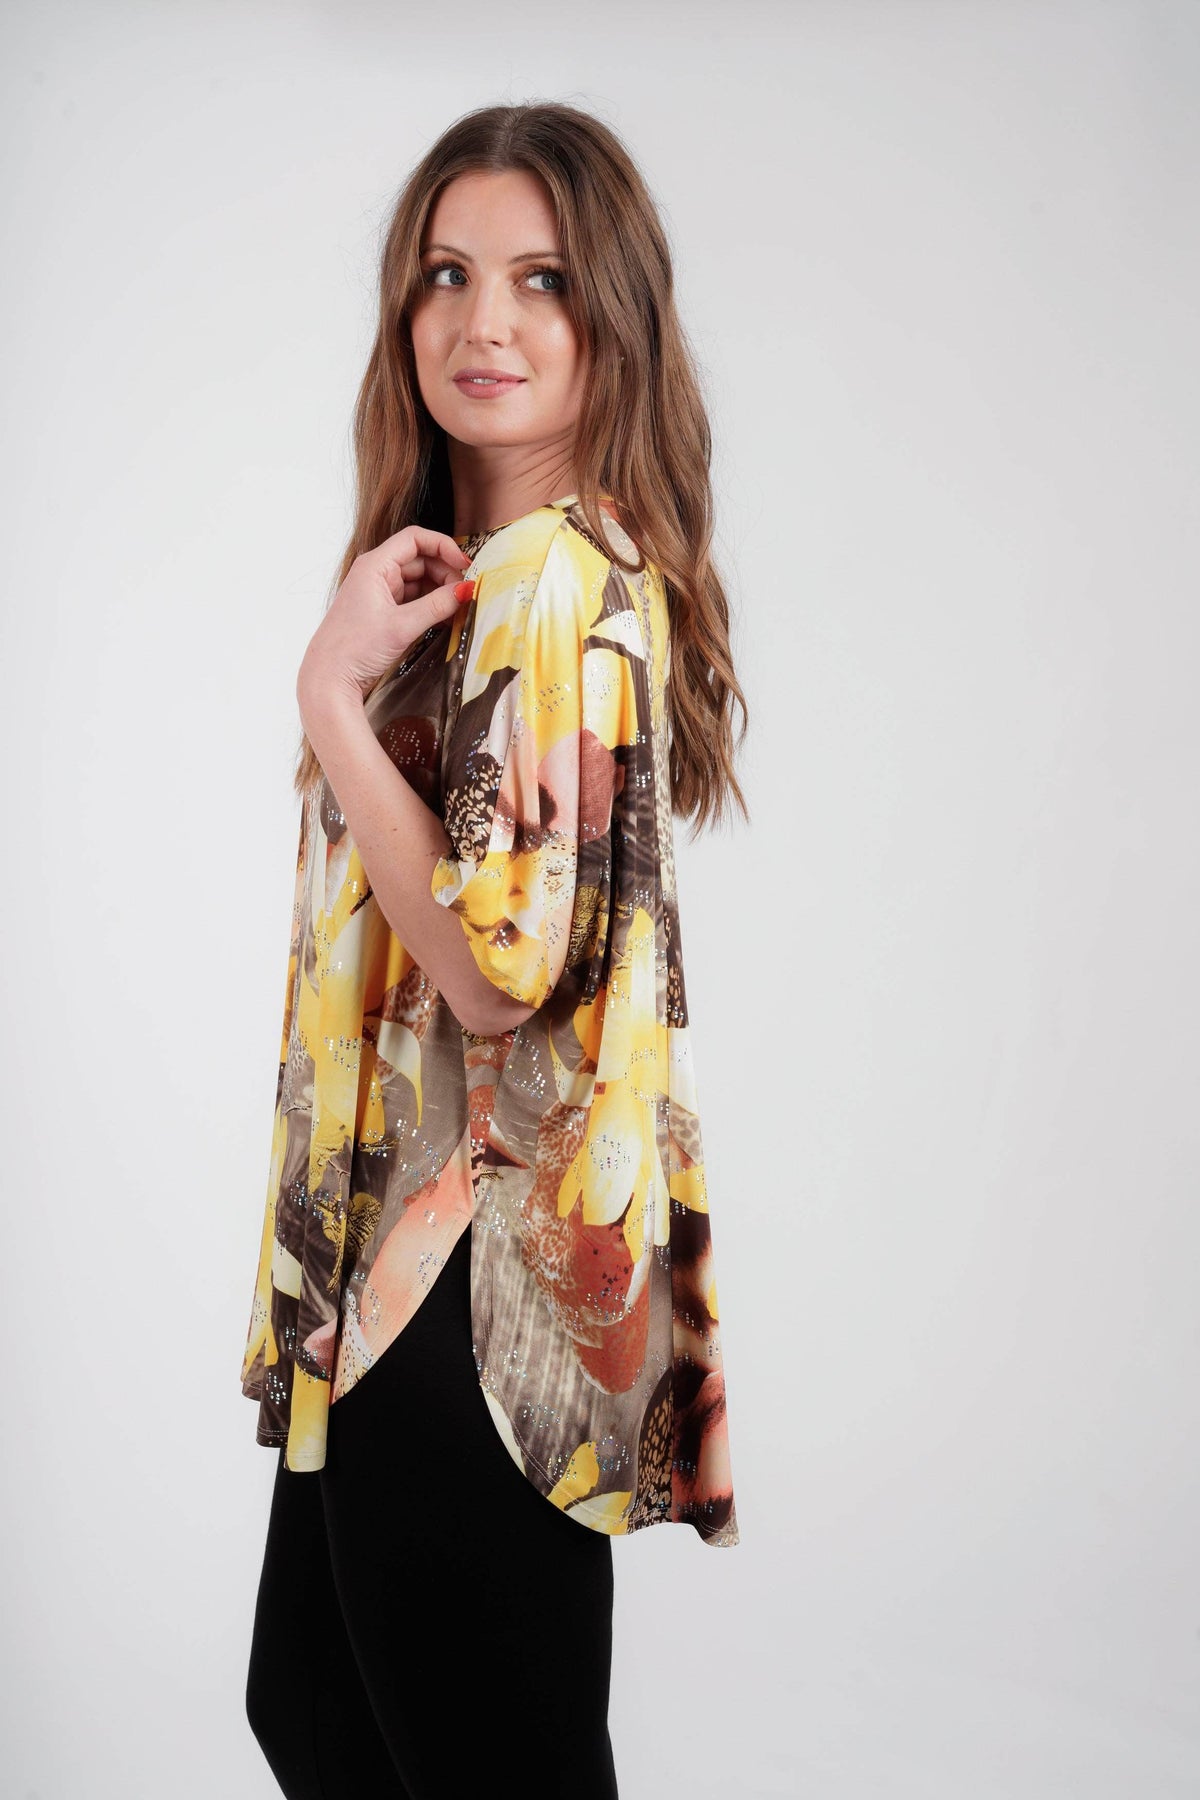 Saloos Top Relaxed Floral Cape Top